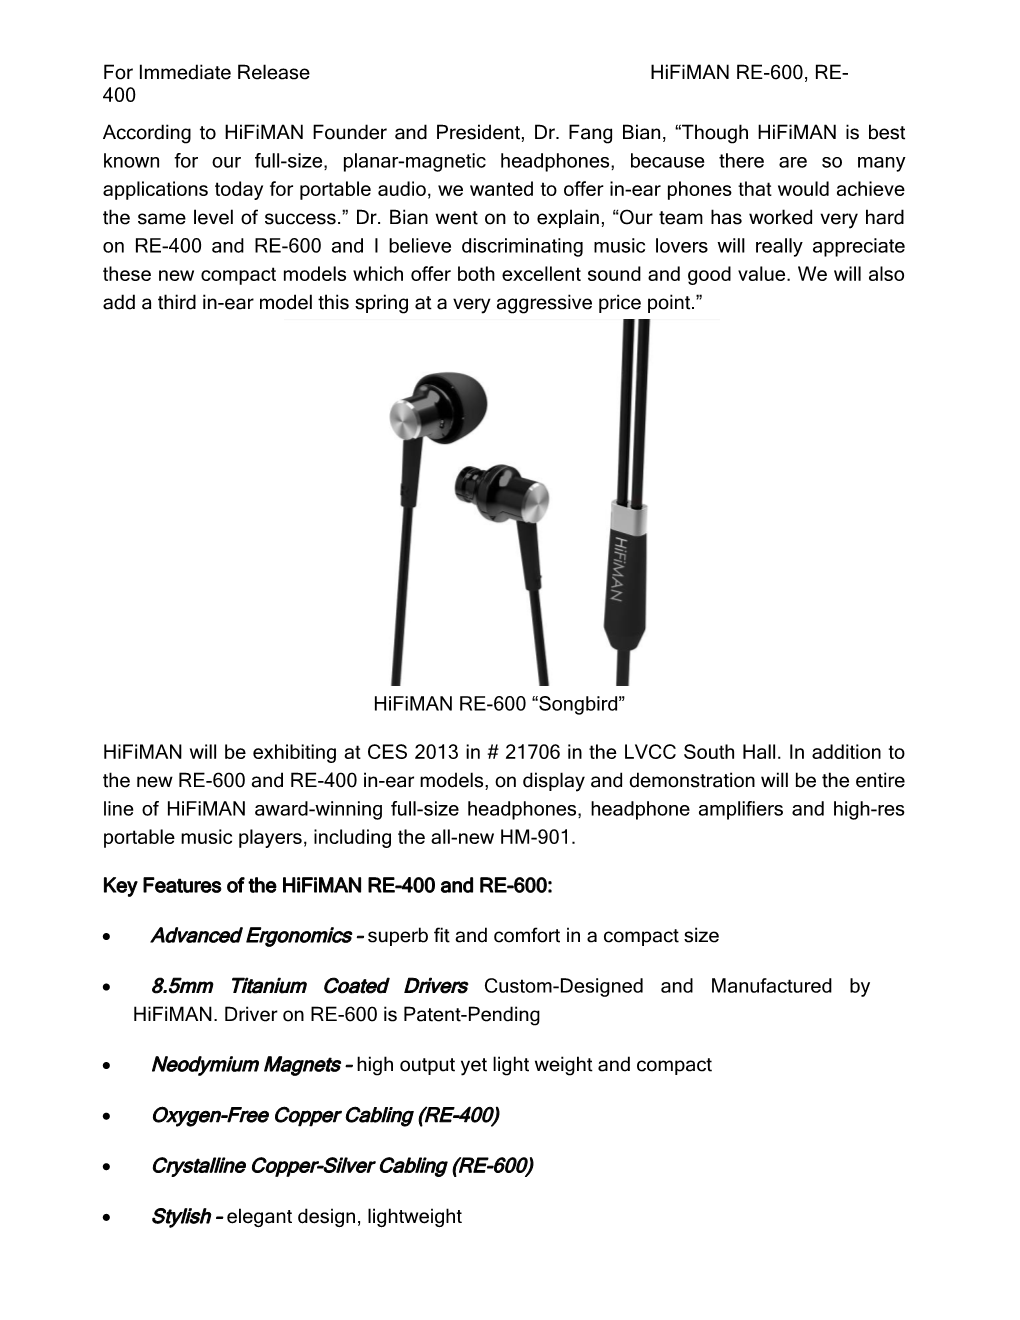 For Immediate Release Hifiman RE-600, RE-400